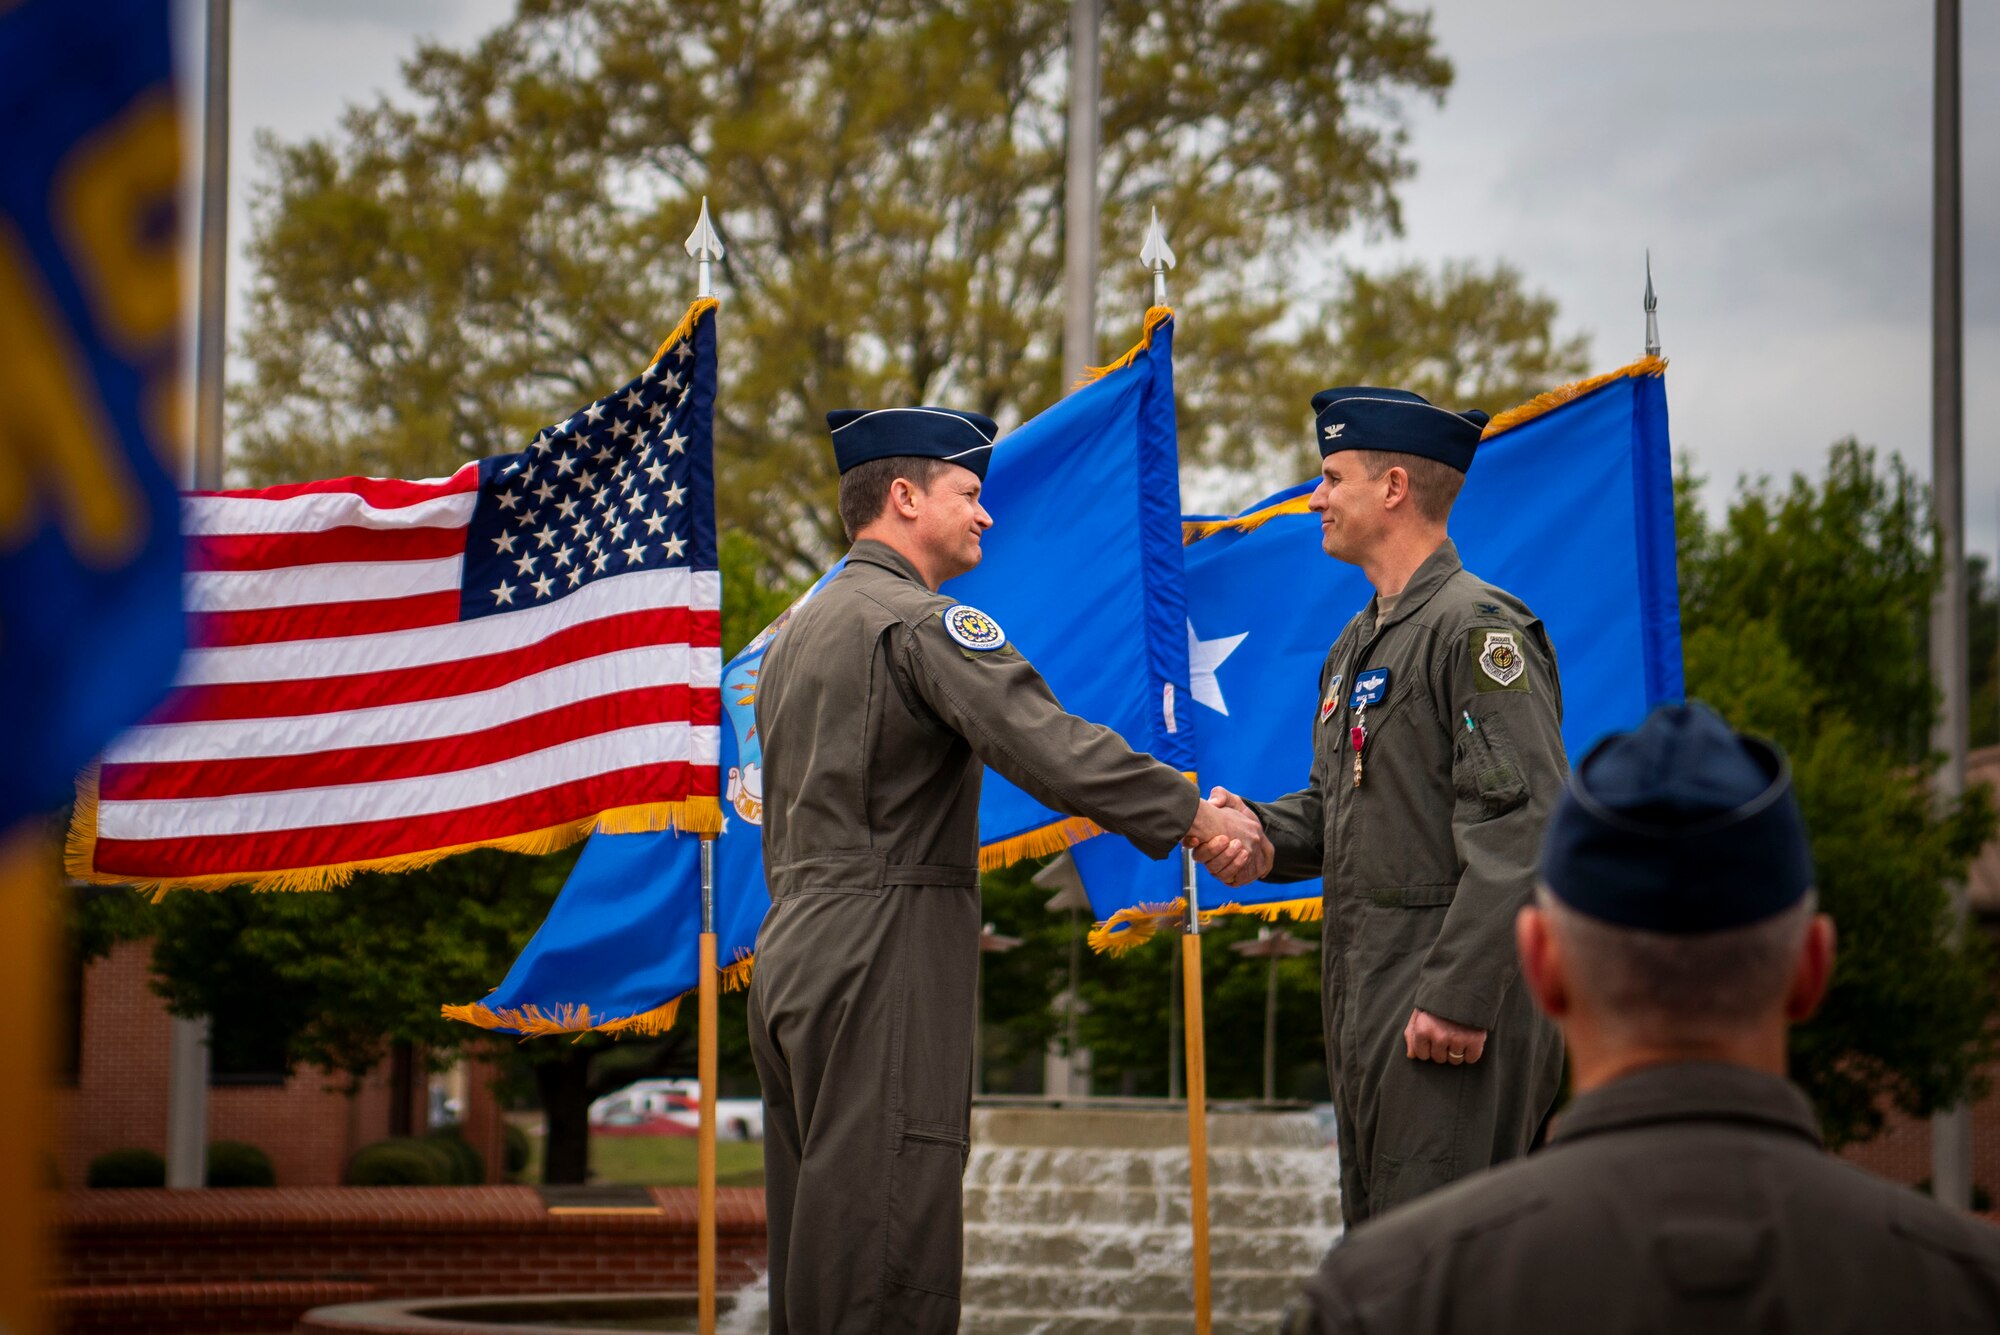 Maj. Gen. David Lyons, Fifteenth Air Force commander, gives the meritorious service pin to Col. Lucas Teel, 4th Fighter Wing commander, during the 4th FW change of command, at Seymour Johnson Air Force Base, North Carolina, March 22, 2024. The Meritorious Service Medal may be awarded to any member of the armed forces of the United States who distinguished themselves by either outstanding achievement or meritorious service to the United States. (U.S Air Force photo by Senior Airman Sabrina Fuller-Judd)